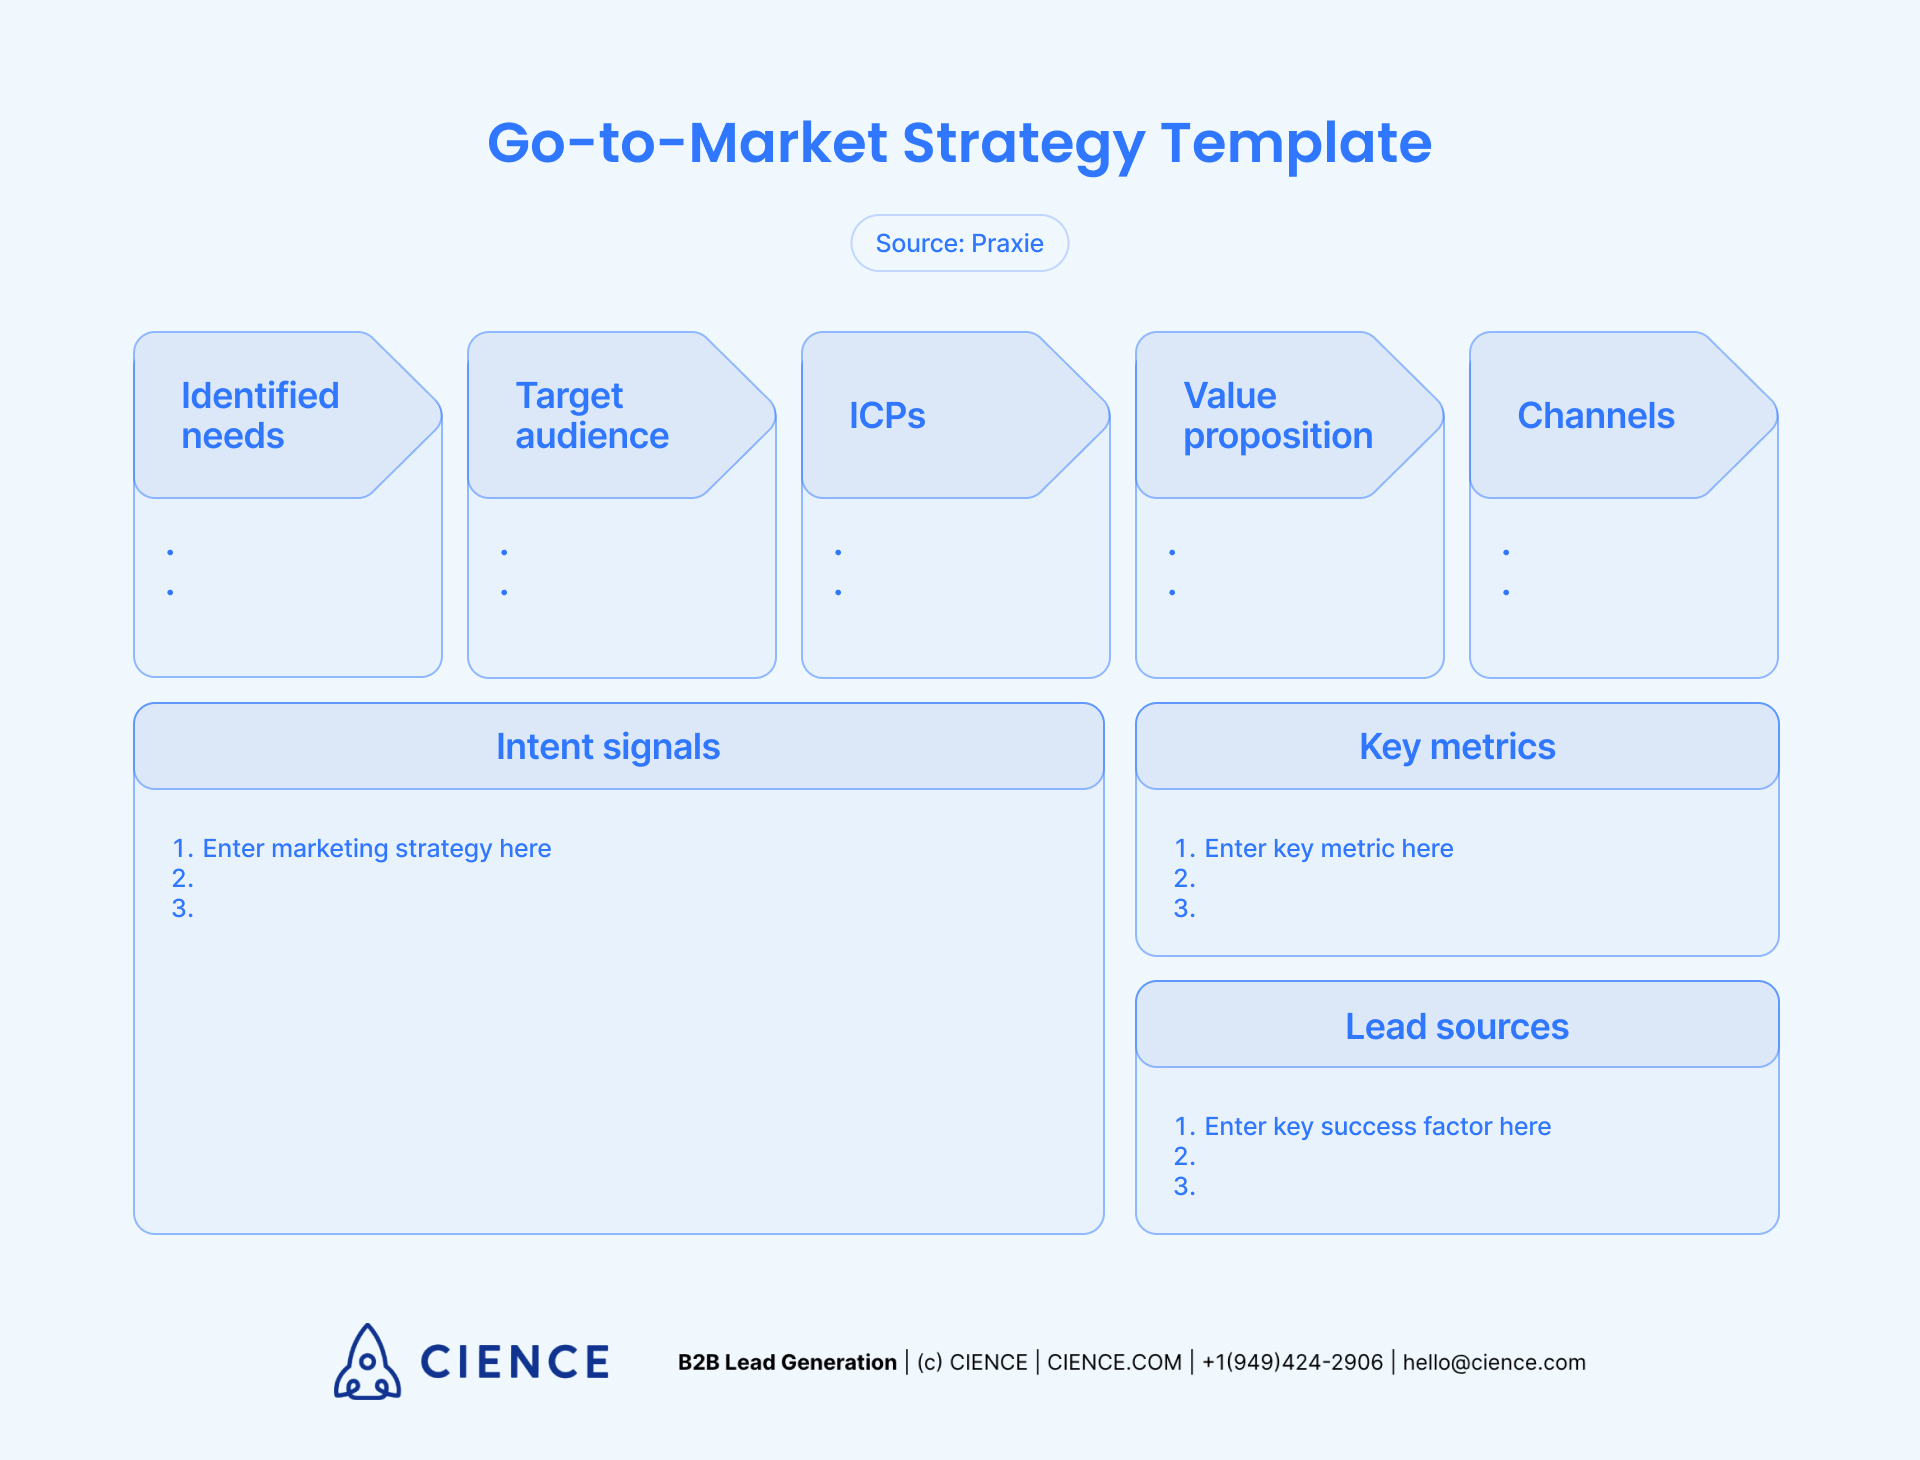 Go-to-Market Strategy Template